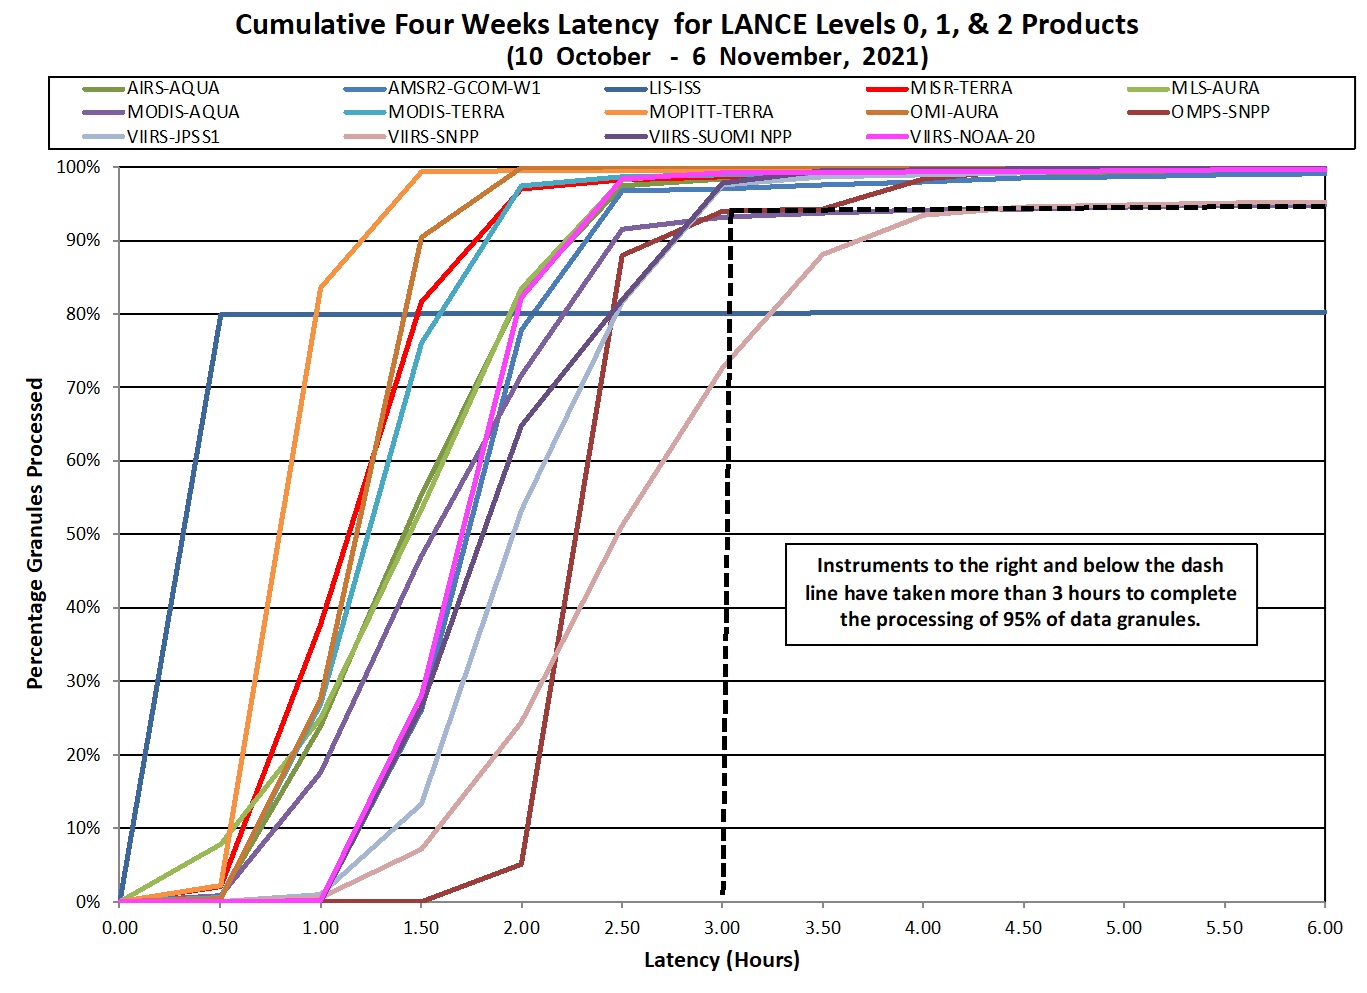 Cumulative four weeks latency for LANCE Levels 0, 1, 2 products